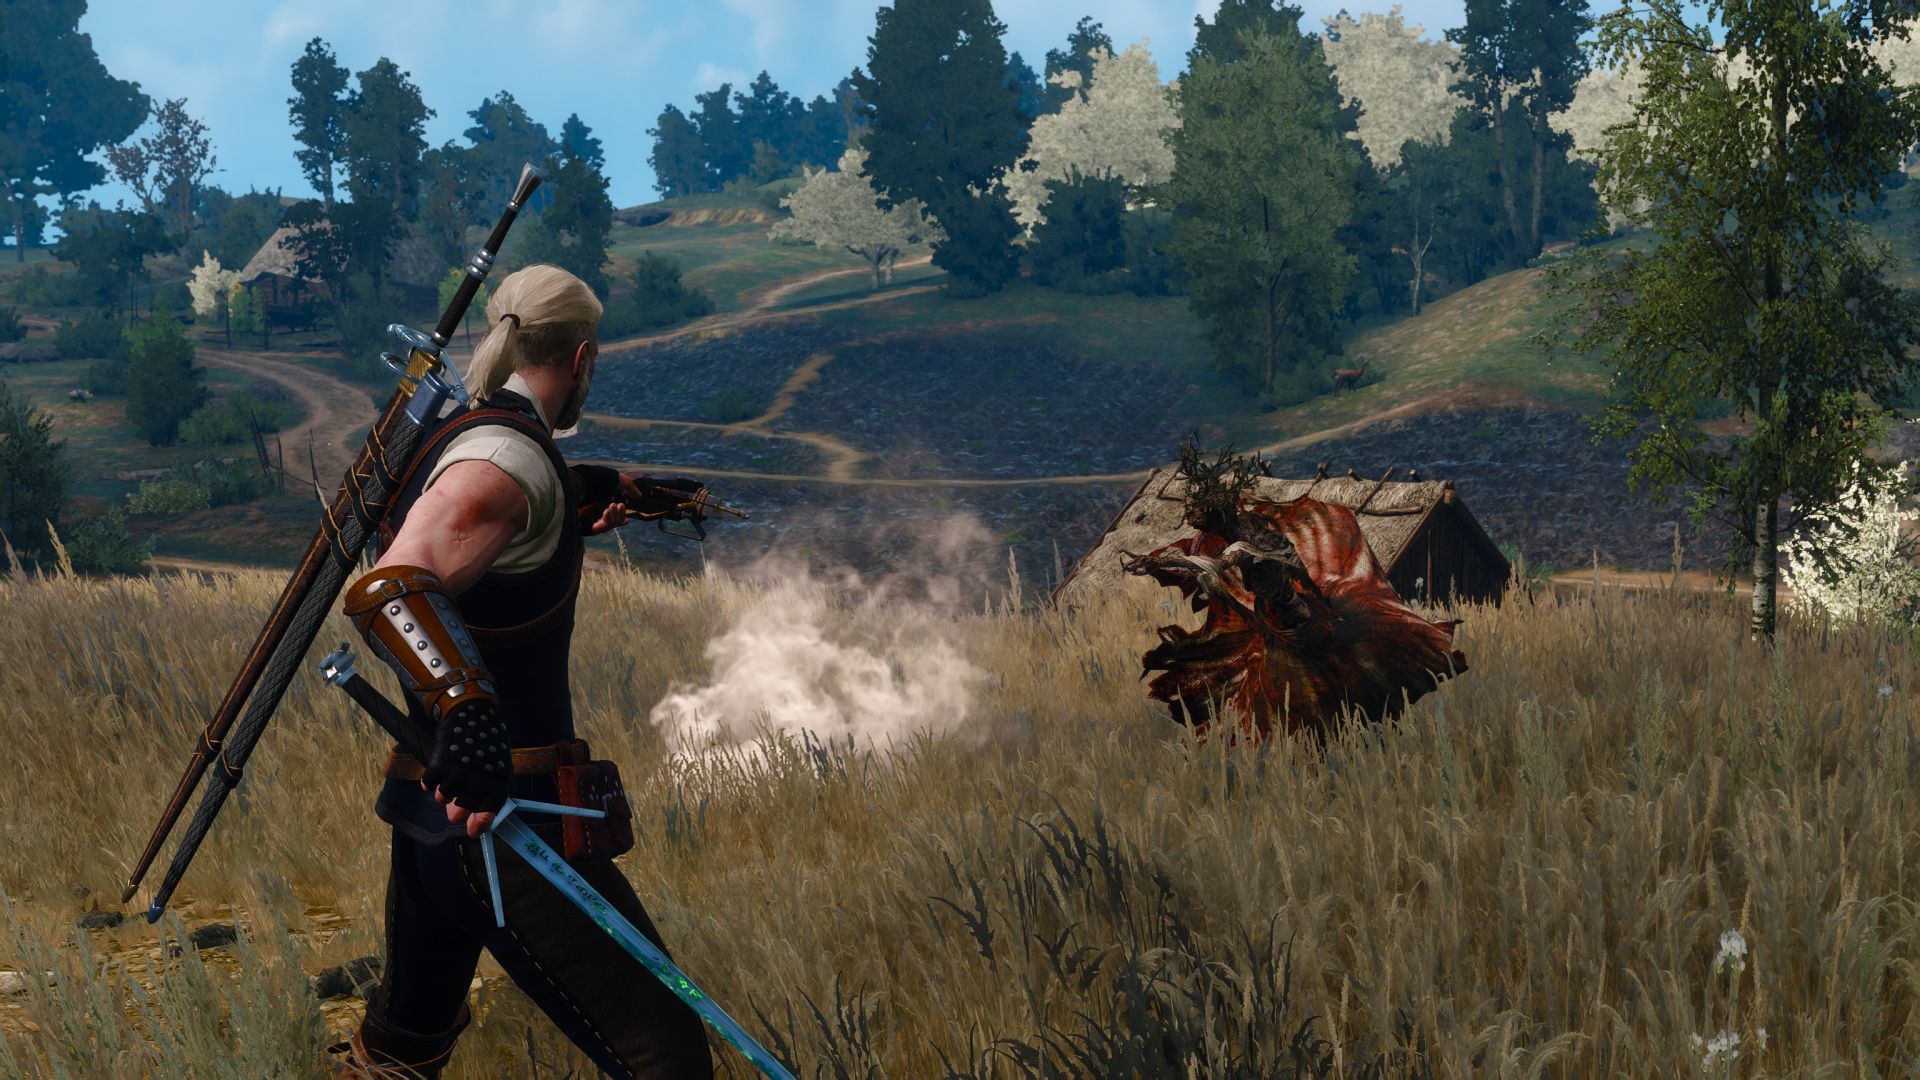 Geralt aims his crossbow at a floating wraith in a field in Novigrad.